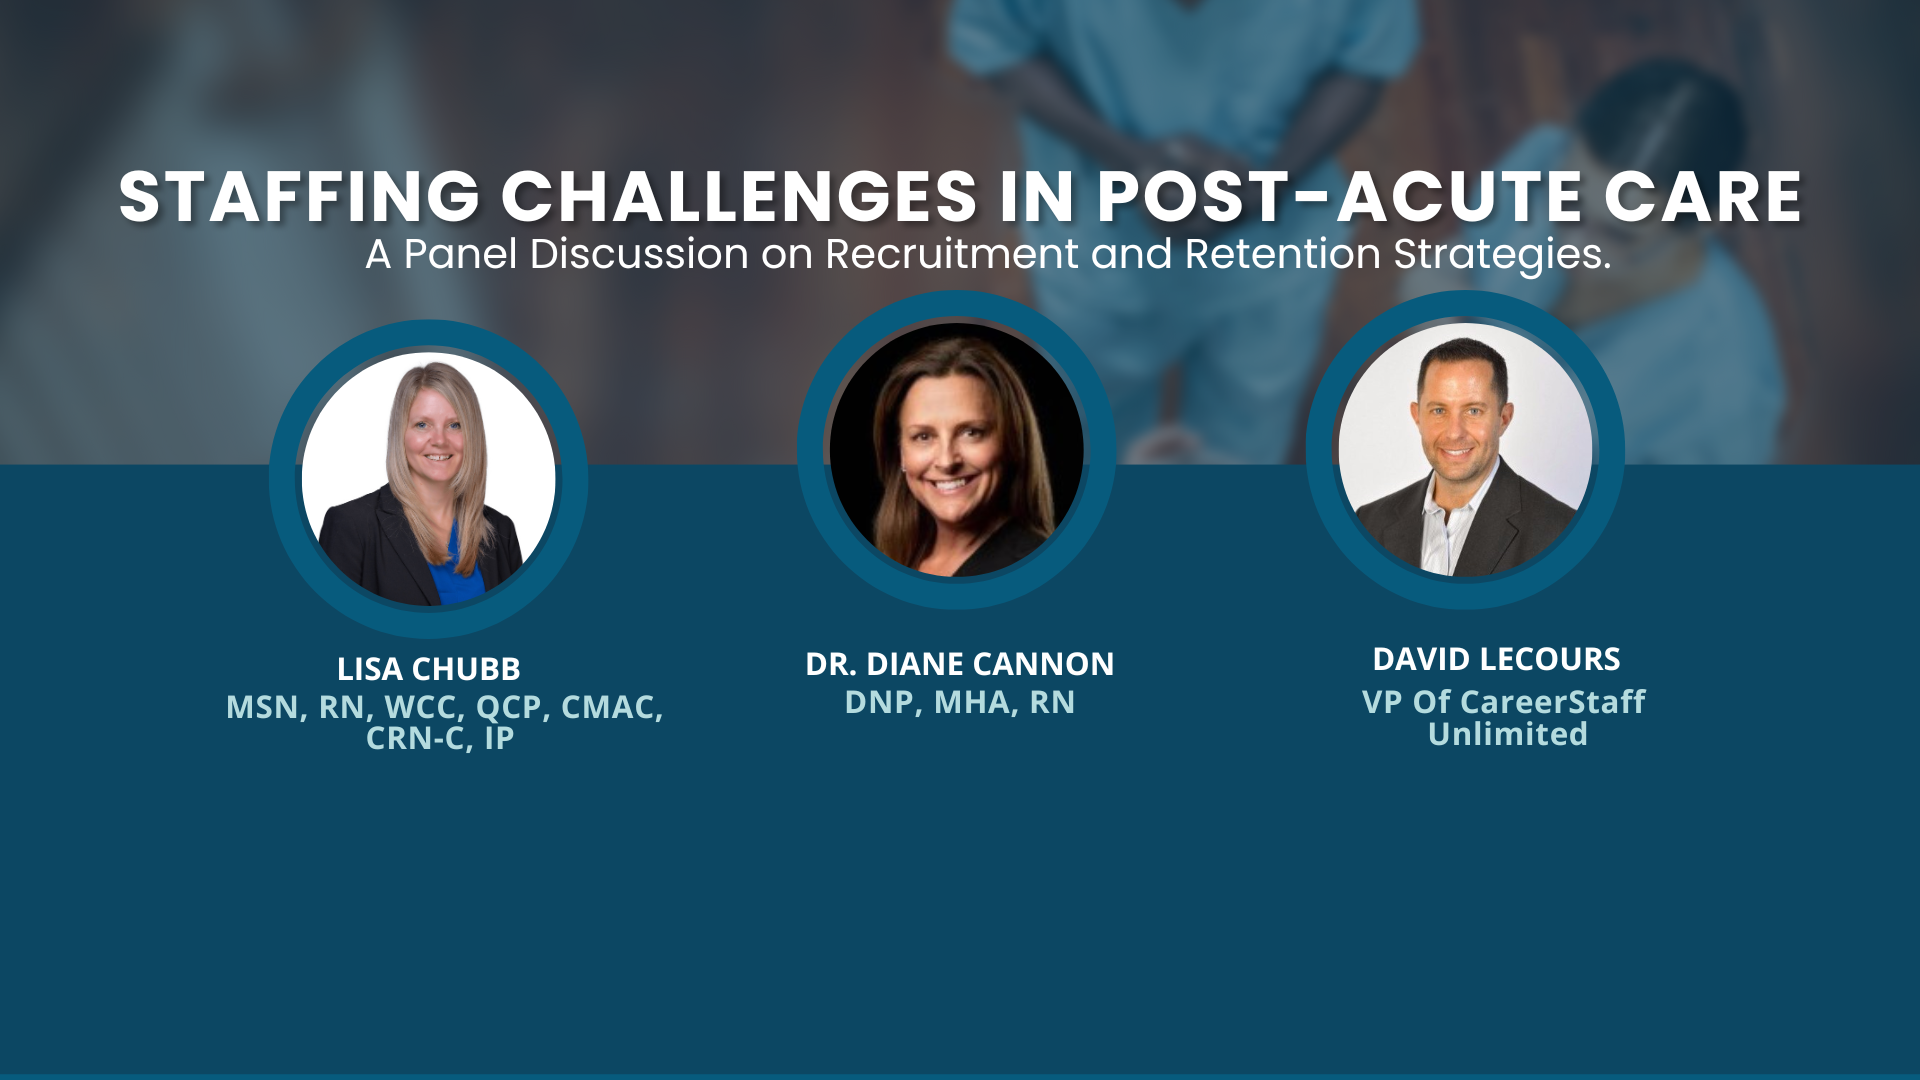 Staffing Challenges in Post-Acute Care. A Panel discussion on Recruitment